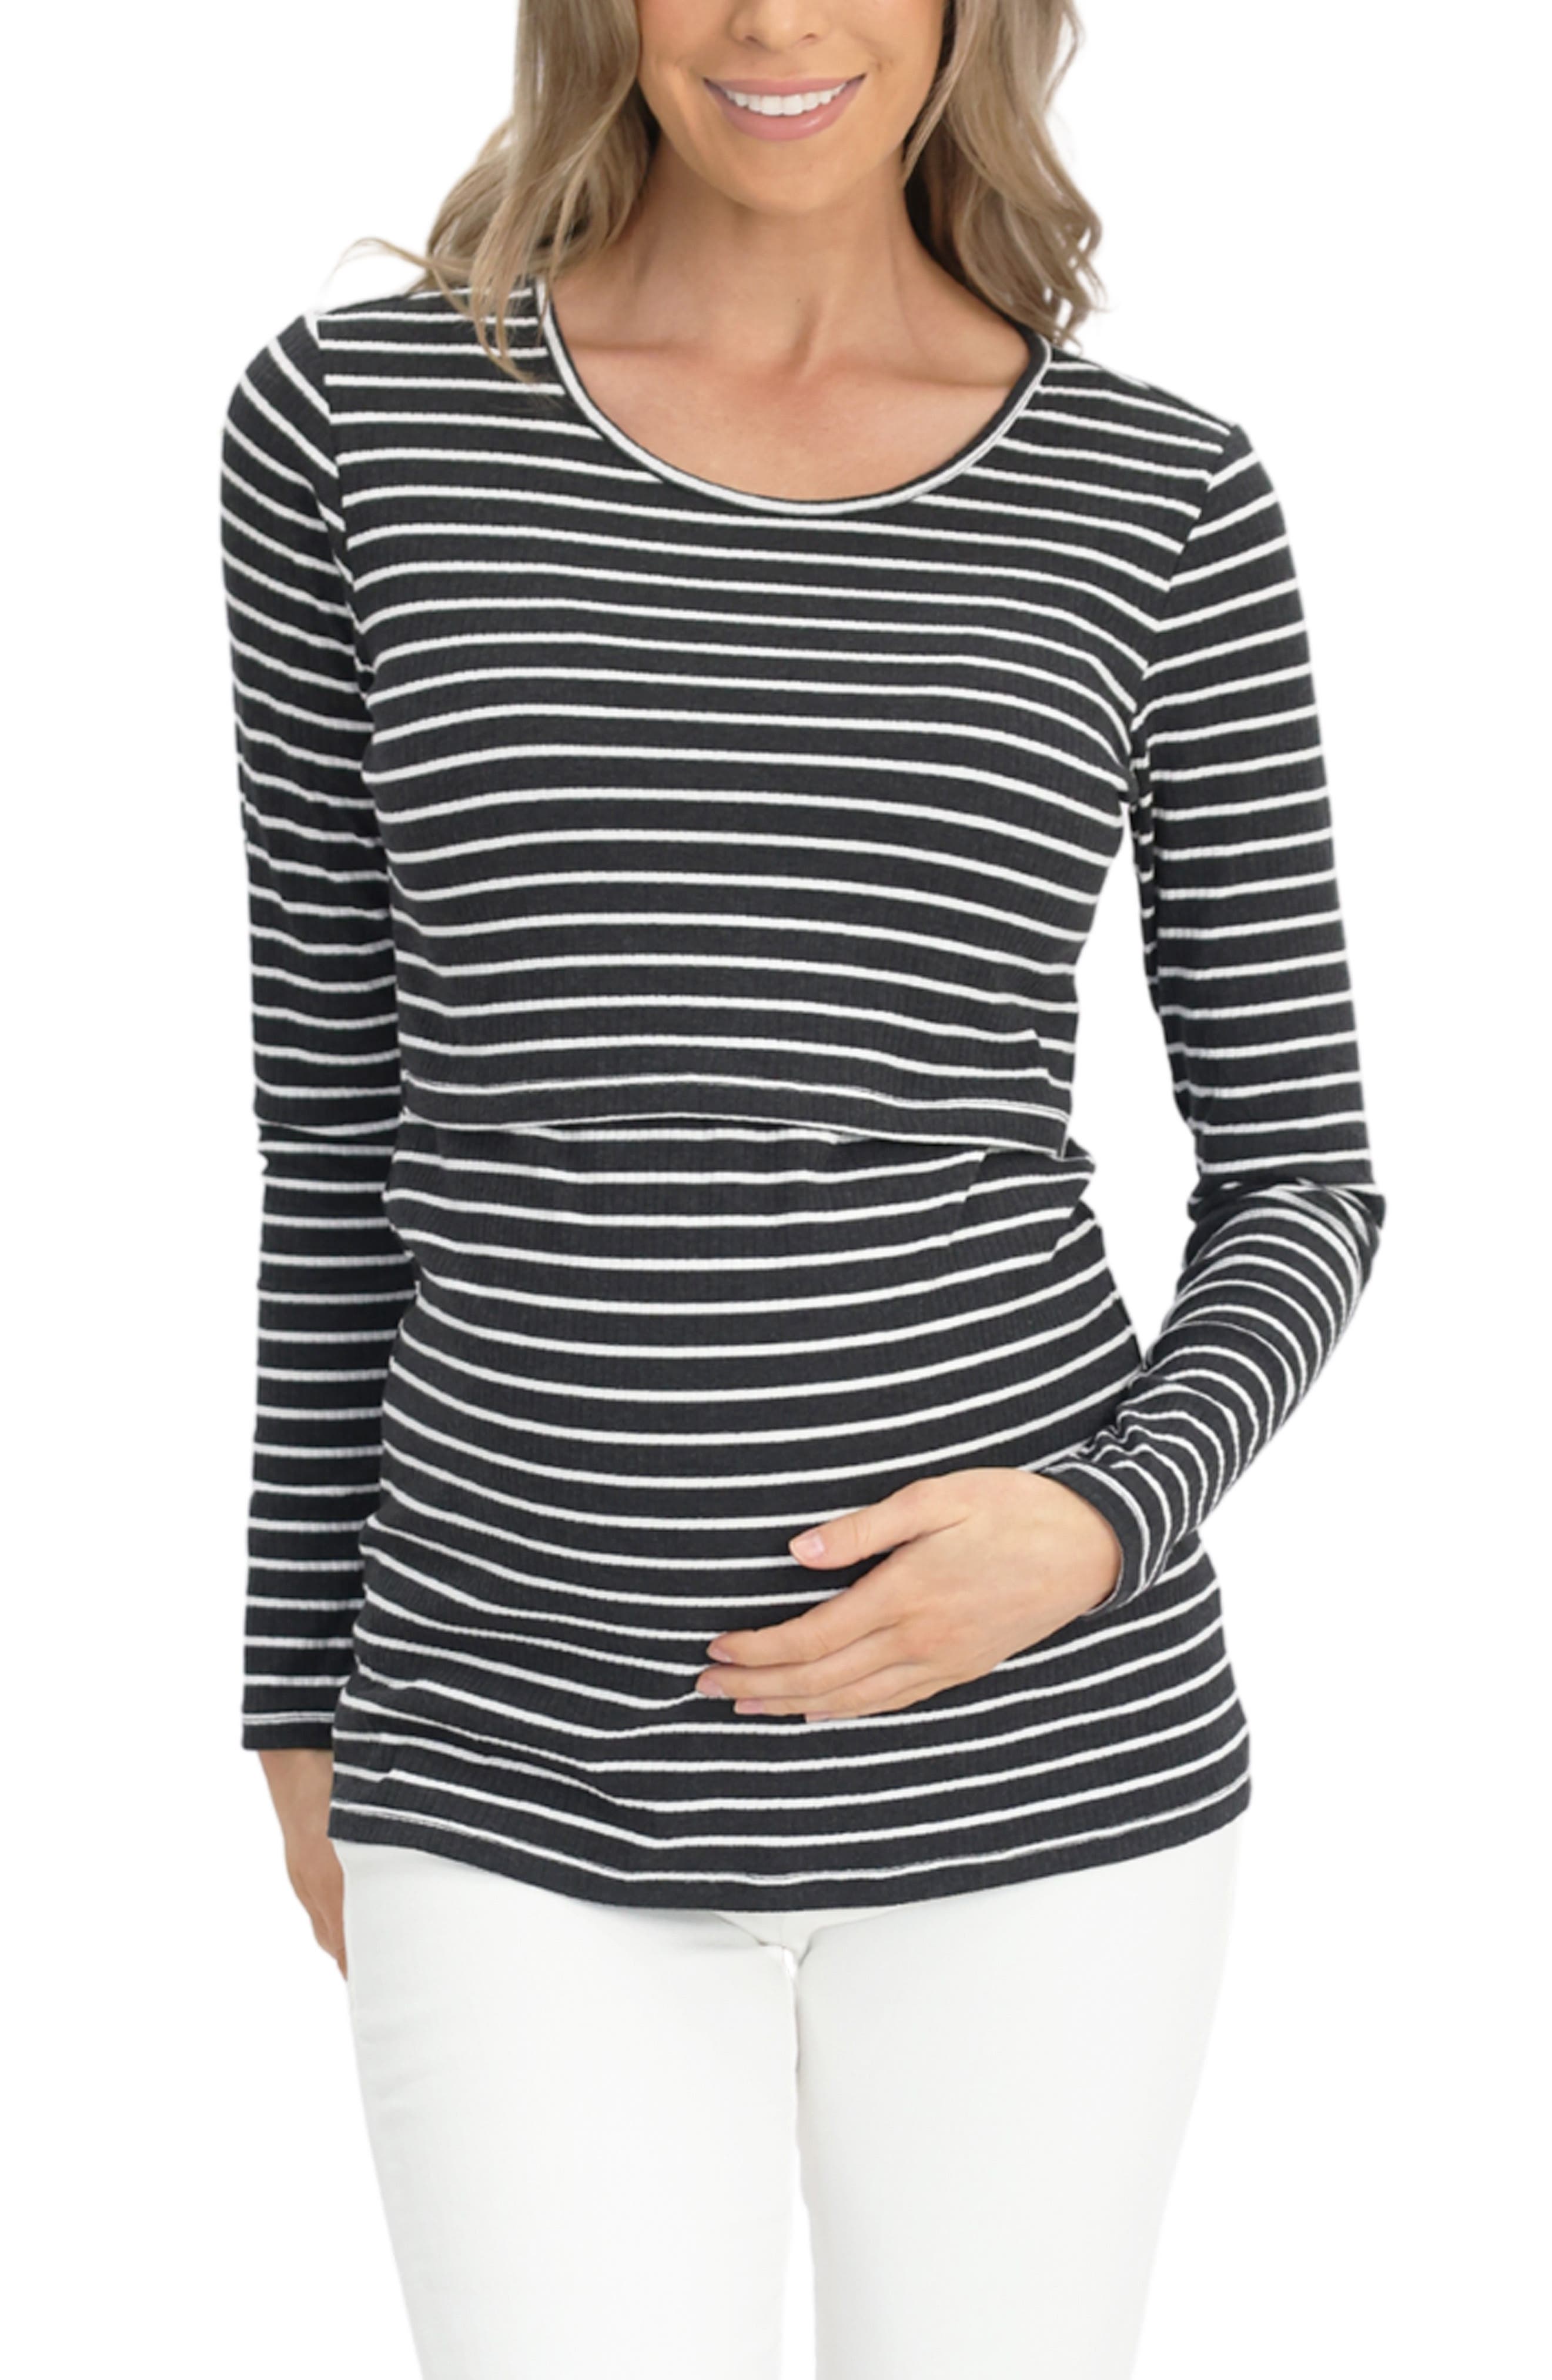 Details about   Women's  Long Sleeve Comfy Layered Nursing Top 